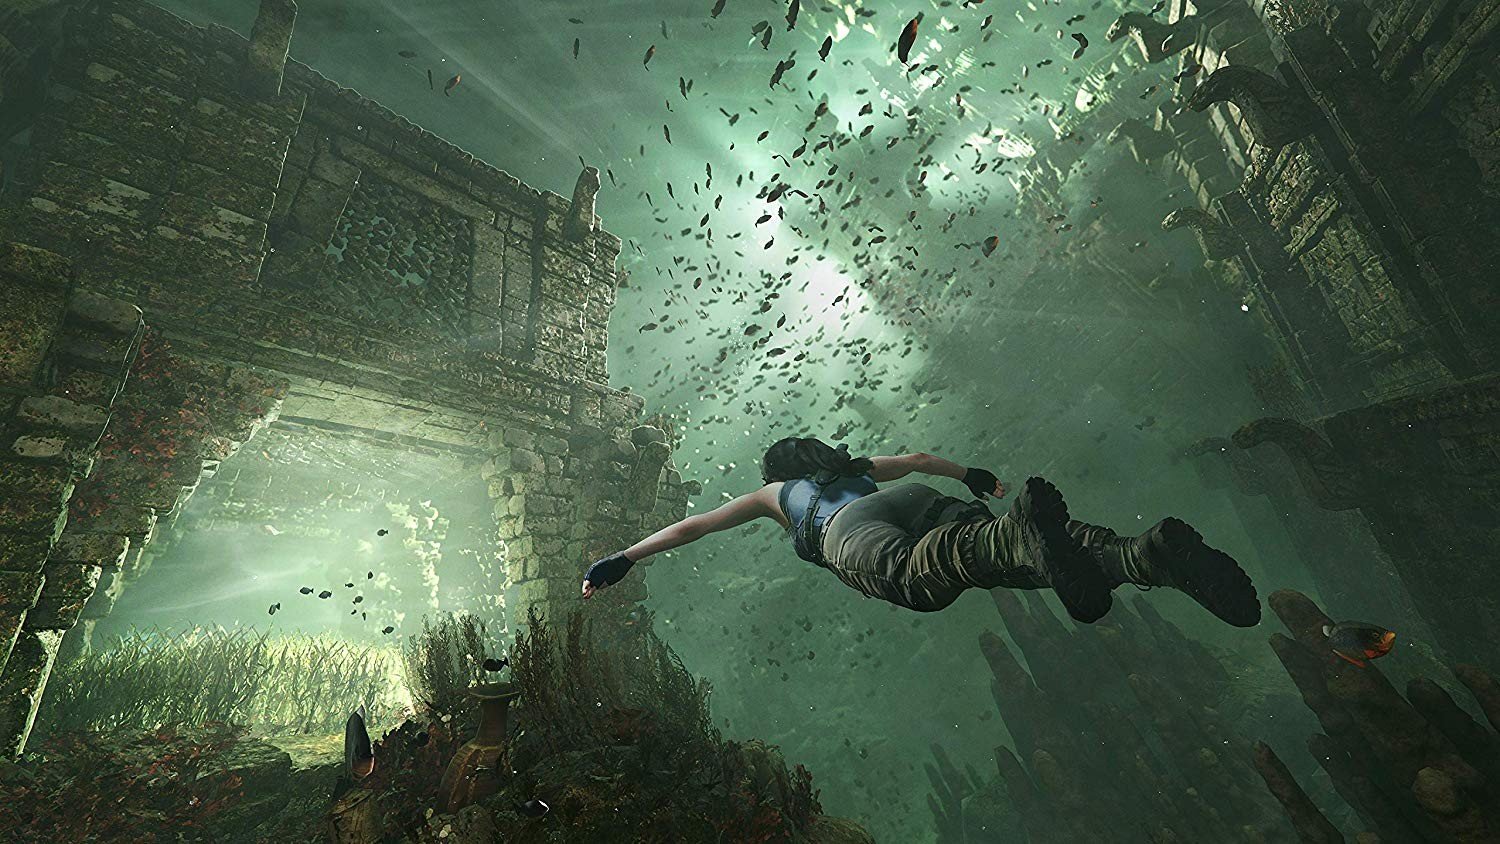 Shadow of the Tomb Raider: Definitive Edition,Shadow of the Tomb Raider,xone, xbox one, ps4, playstation 4, us, north america, eu, europe, release date, gameplay, features, price, square enix, eidos montreal